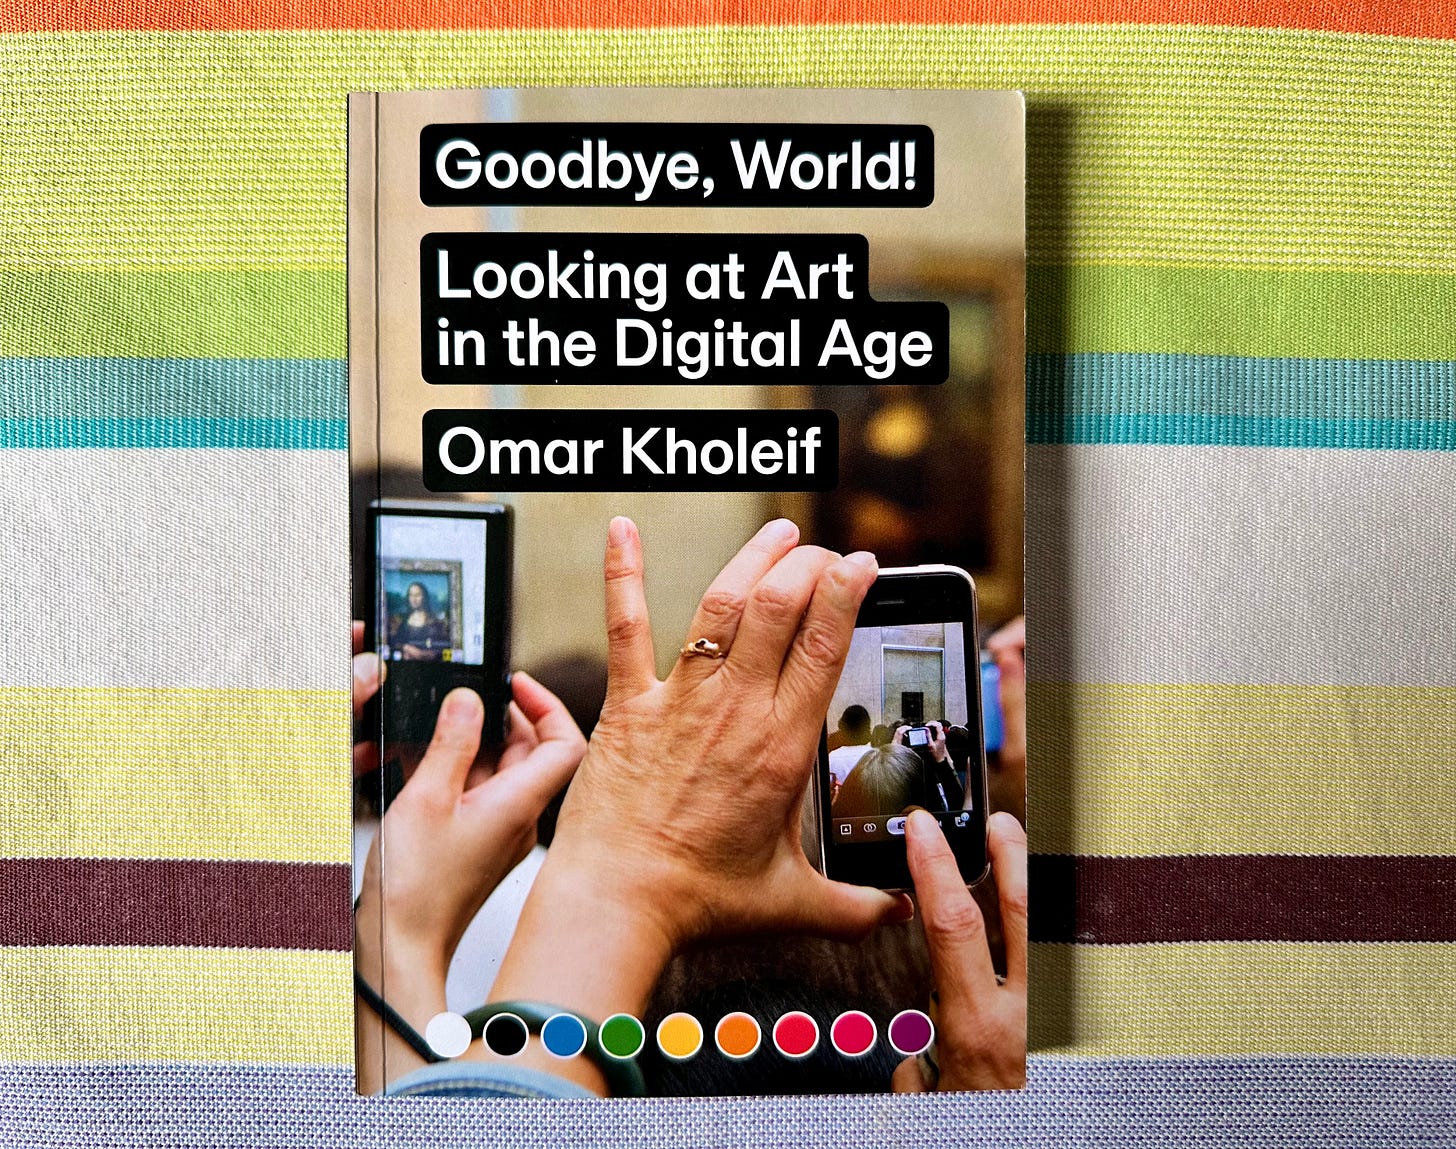 Image of the book "Goodbye, World! Looking at Art in the Digital Age" by Omar Kholief on a green, turquoise and yellow multi striped cloth. The cover of the book shows the hands of a man in the foreground taking a photon a crowd which on close examination appears to be the Mona Lisa, blurred in the background, surrounded by lots of other people out of focus doing the same. White text is overlaid stating “First #3: Goodbye, World! Looking at Art in the Digital Age. Digital culture, art, and how technology shapes our perception of each.” Available February 1st, 2024 at UXMICHAELCO.SUBSTACK.COM”.